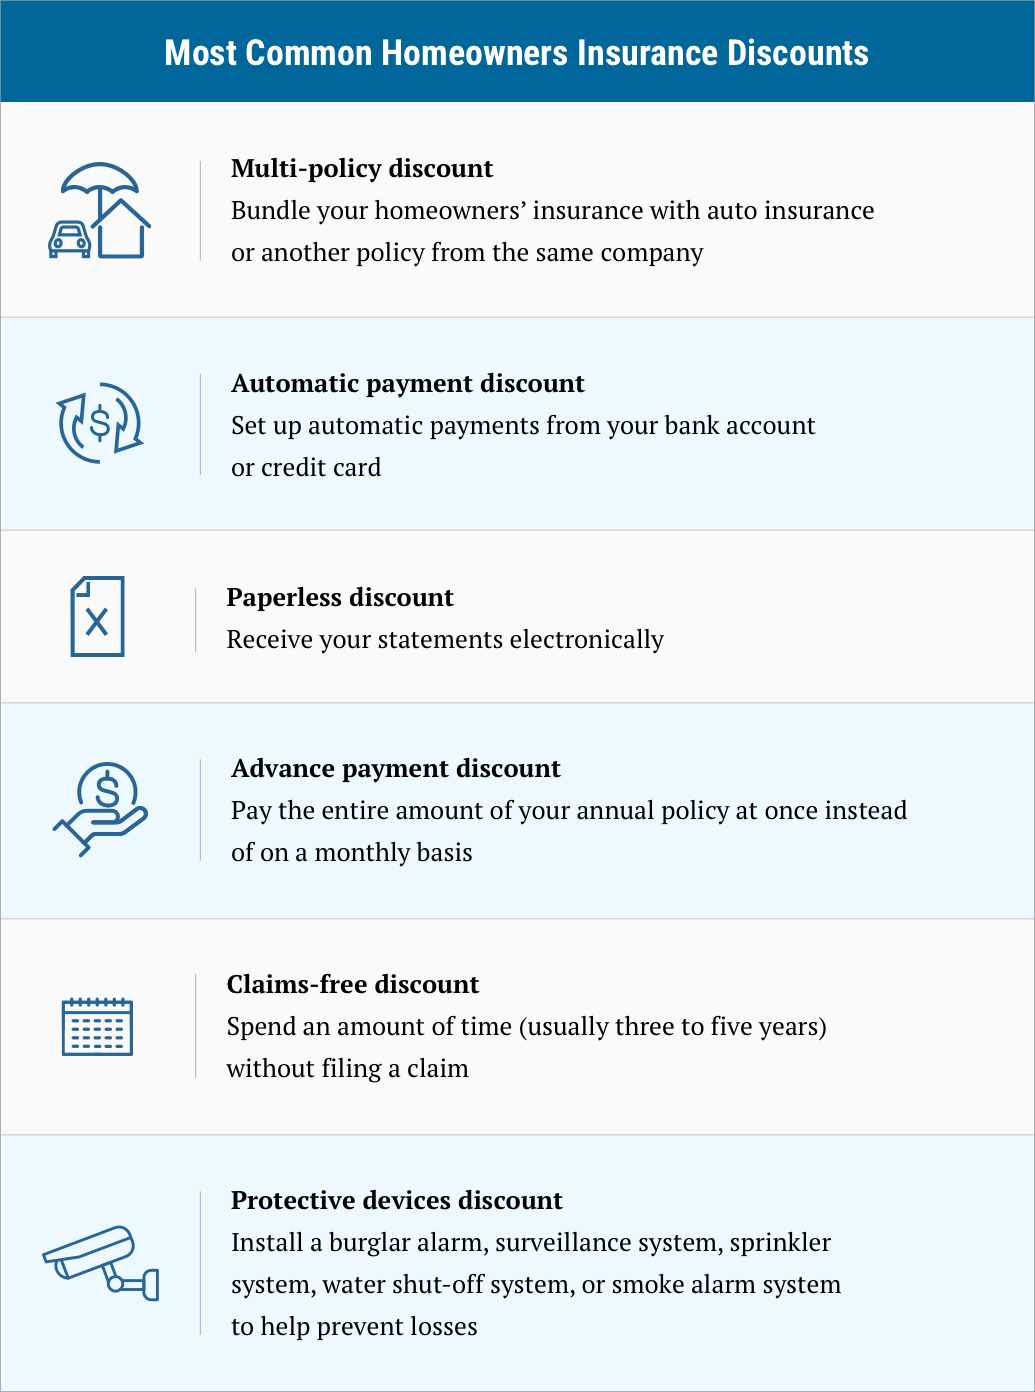 Most Common Homeowners Insurance Discounts